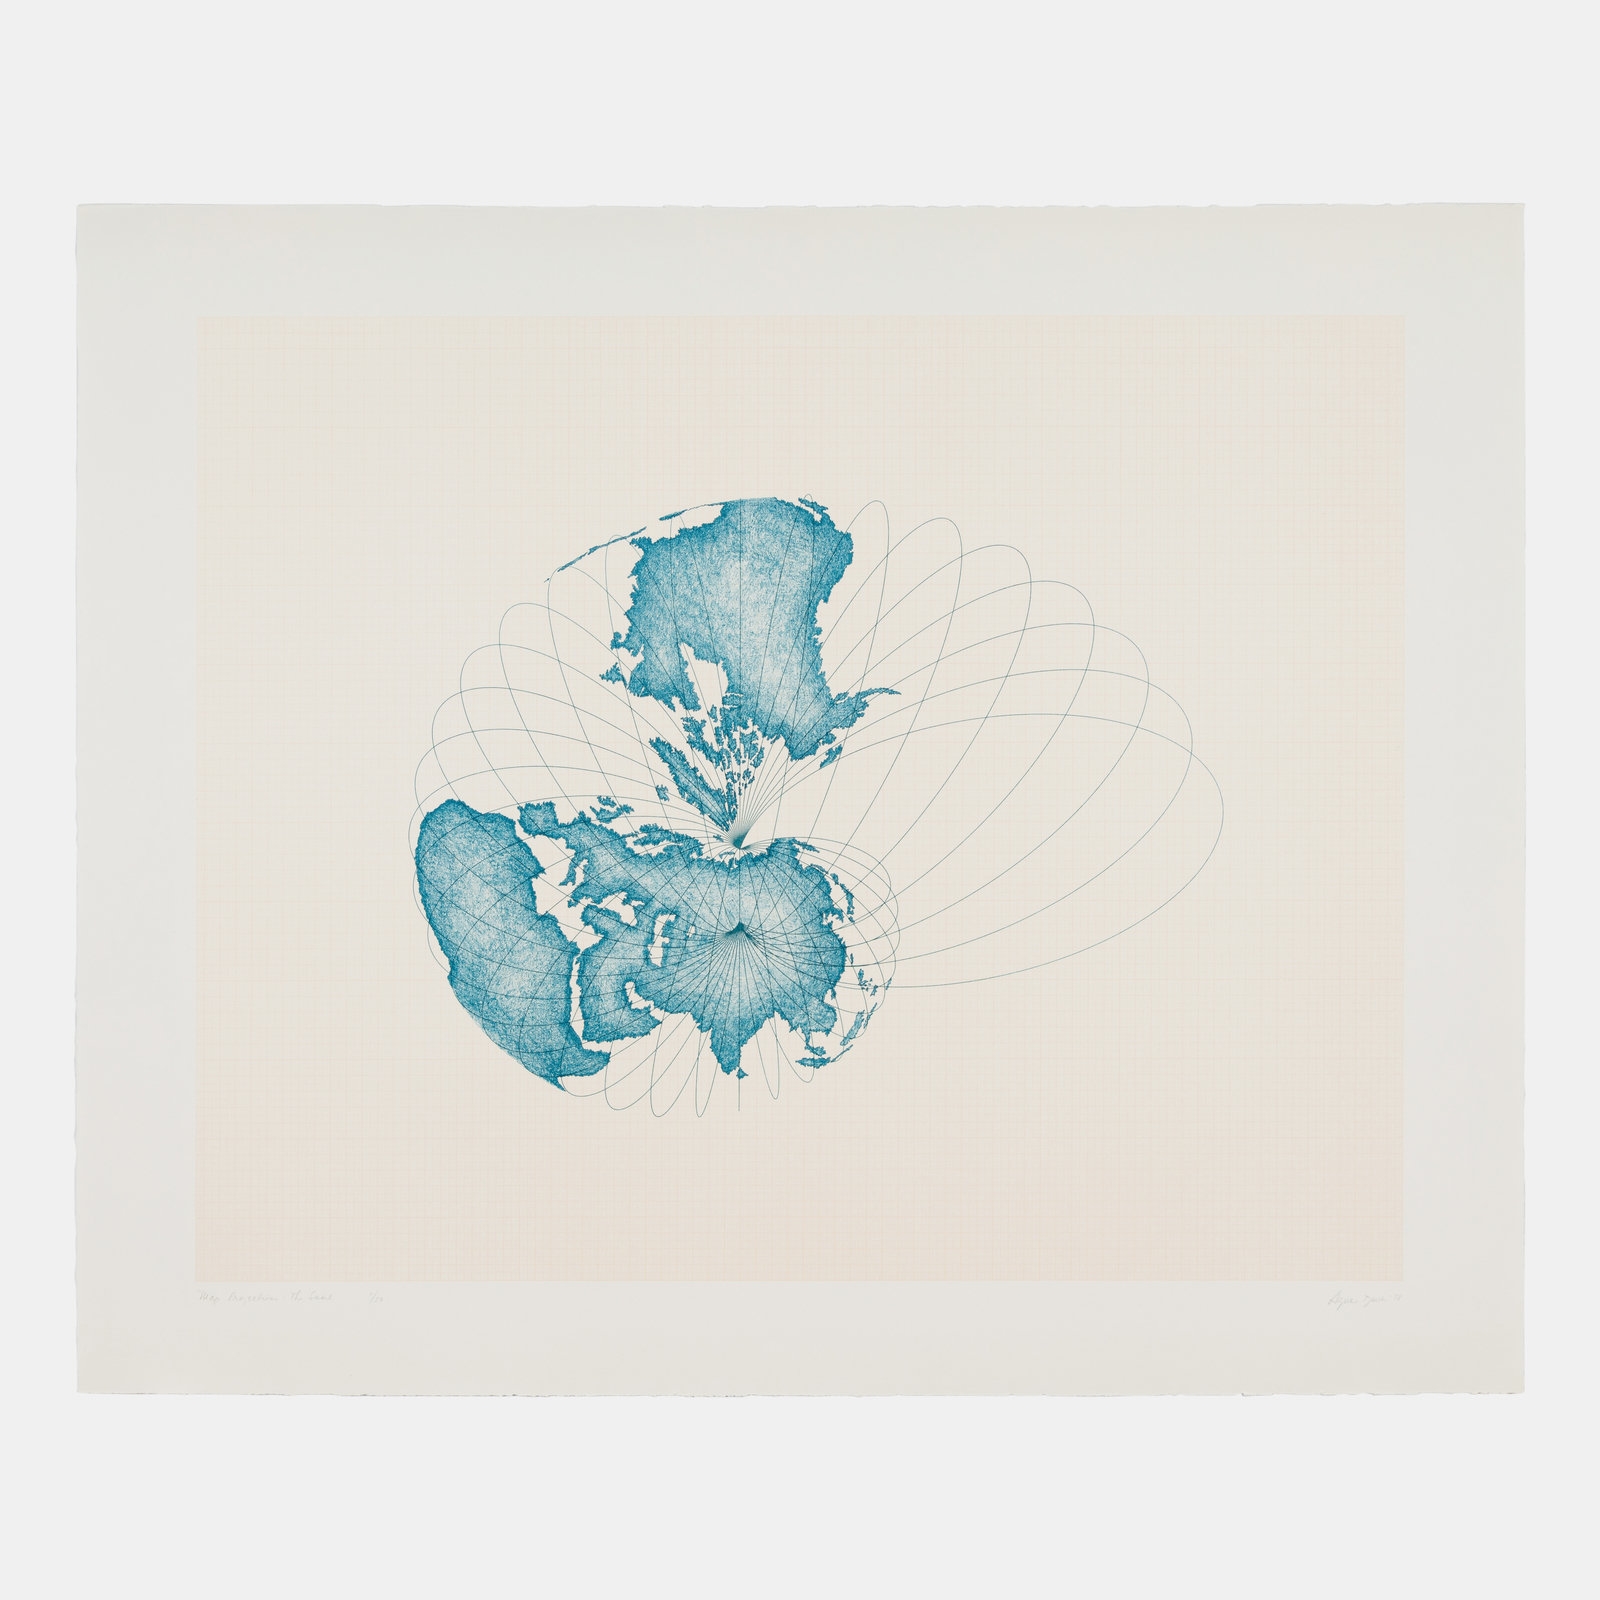 Map Projection: The Snail by Agnes Denes, 1978